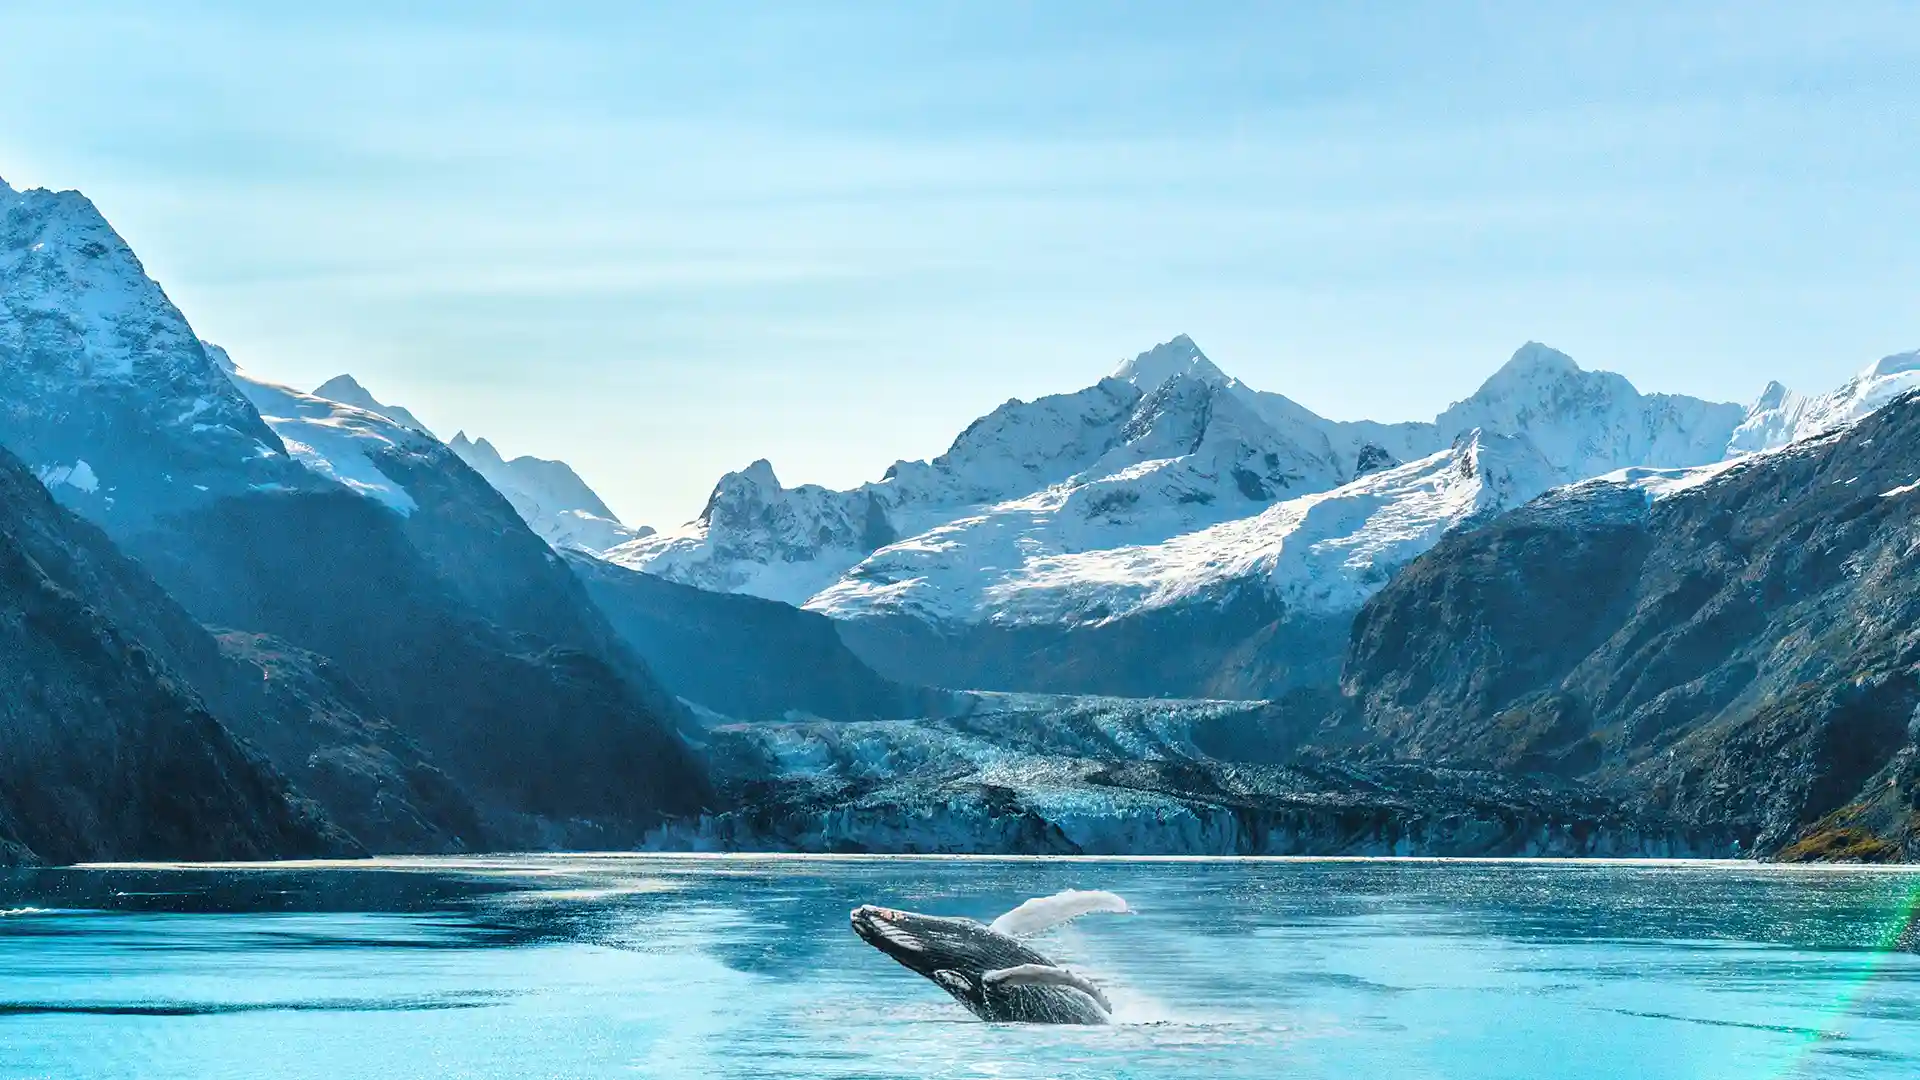 View of a whale breaching the ocean waters in front of an Alaska glacier and snowcapped mountains.